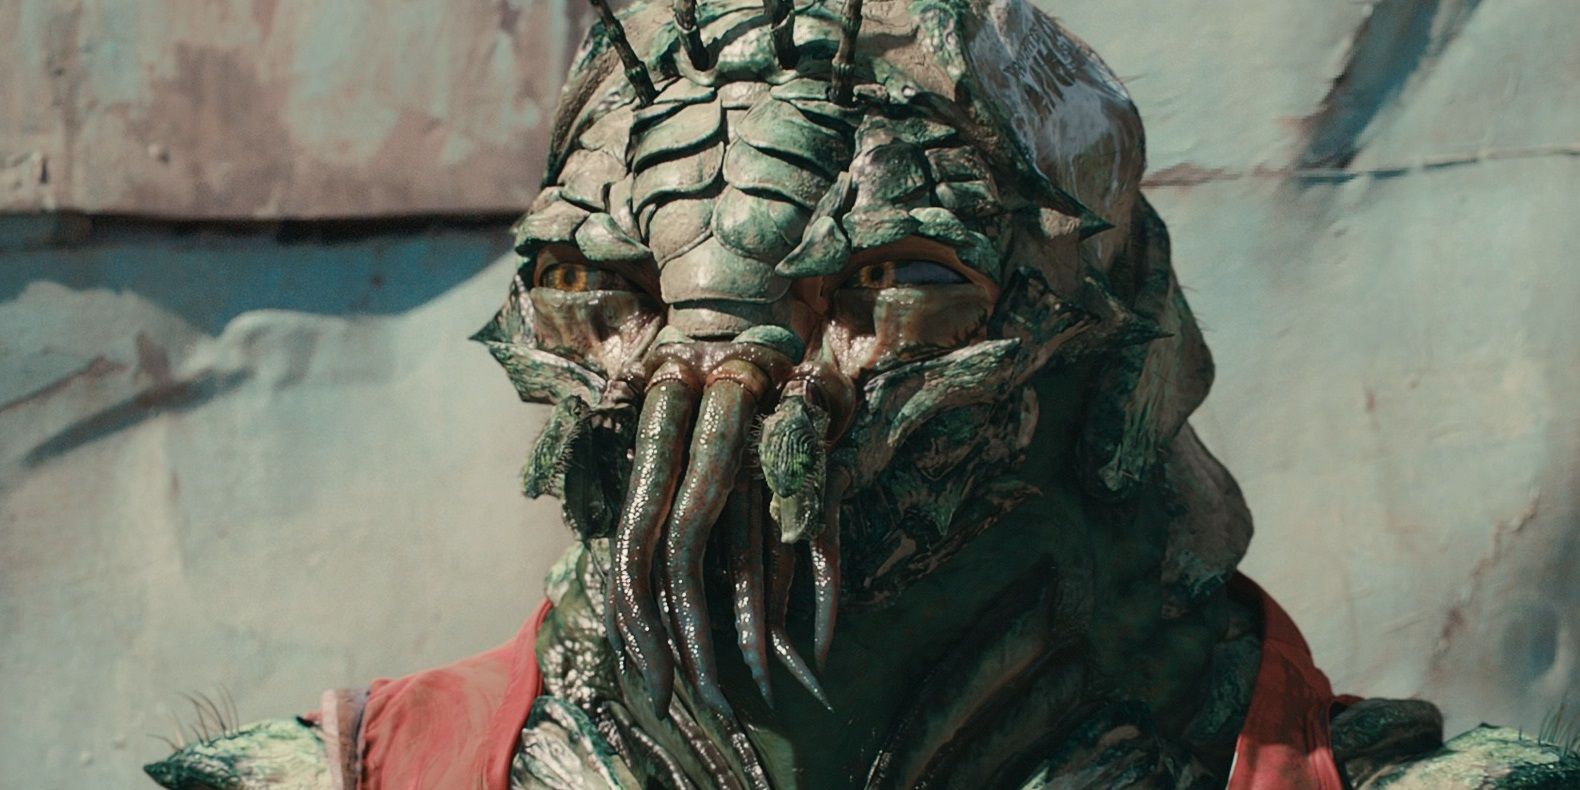 Christopher Johnson in District 9